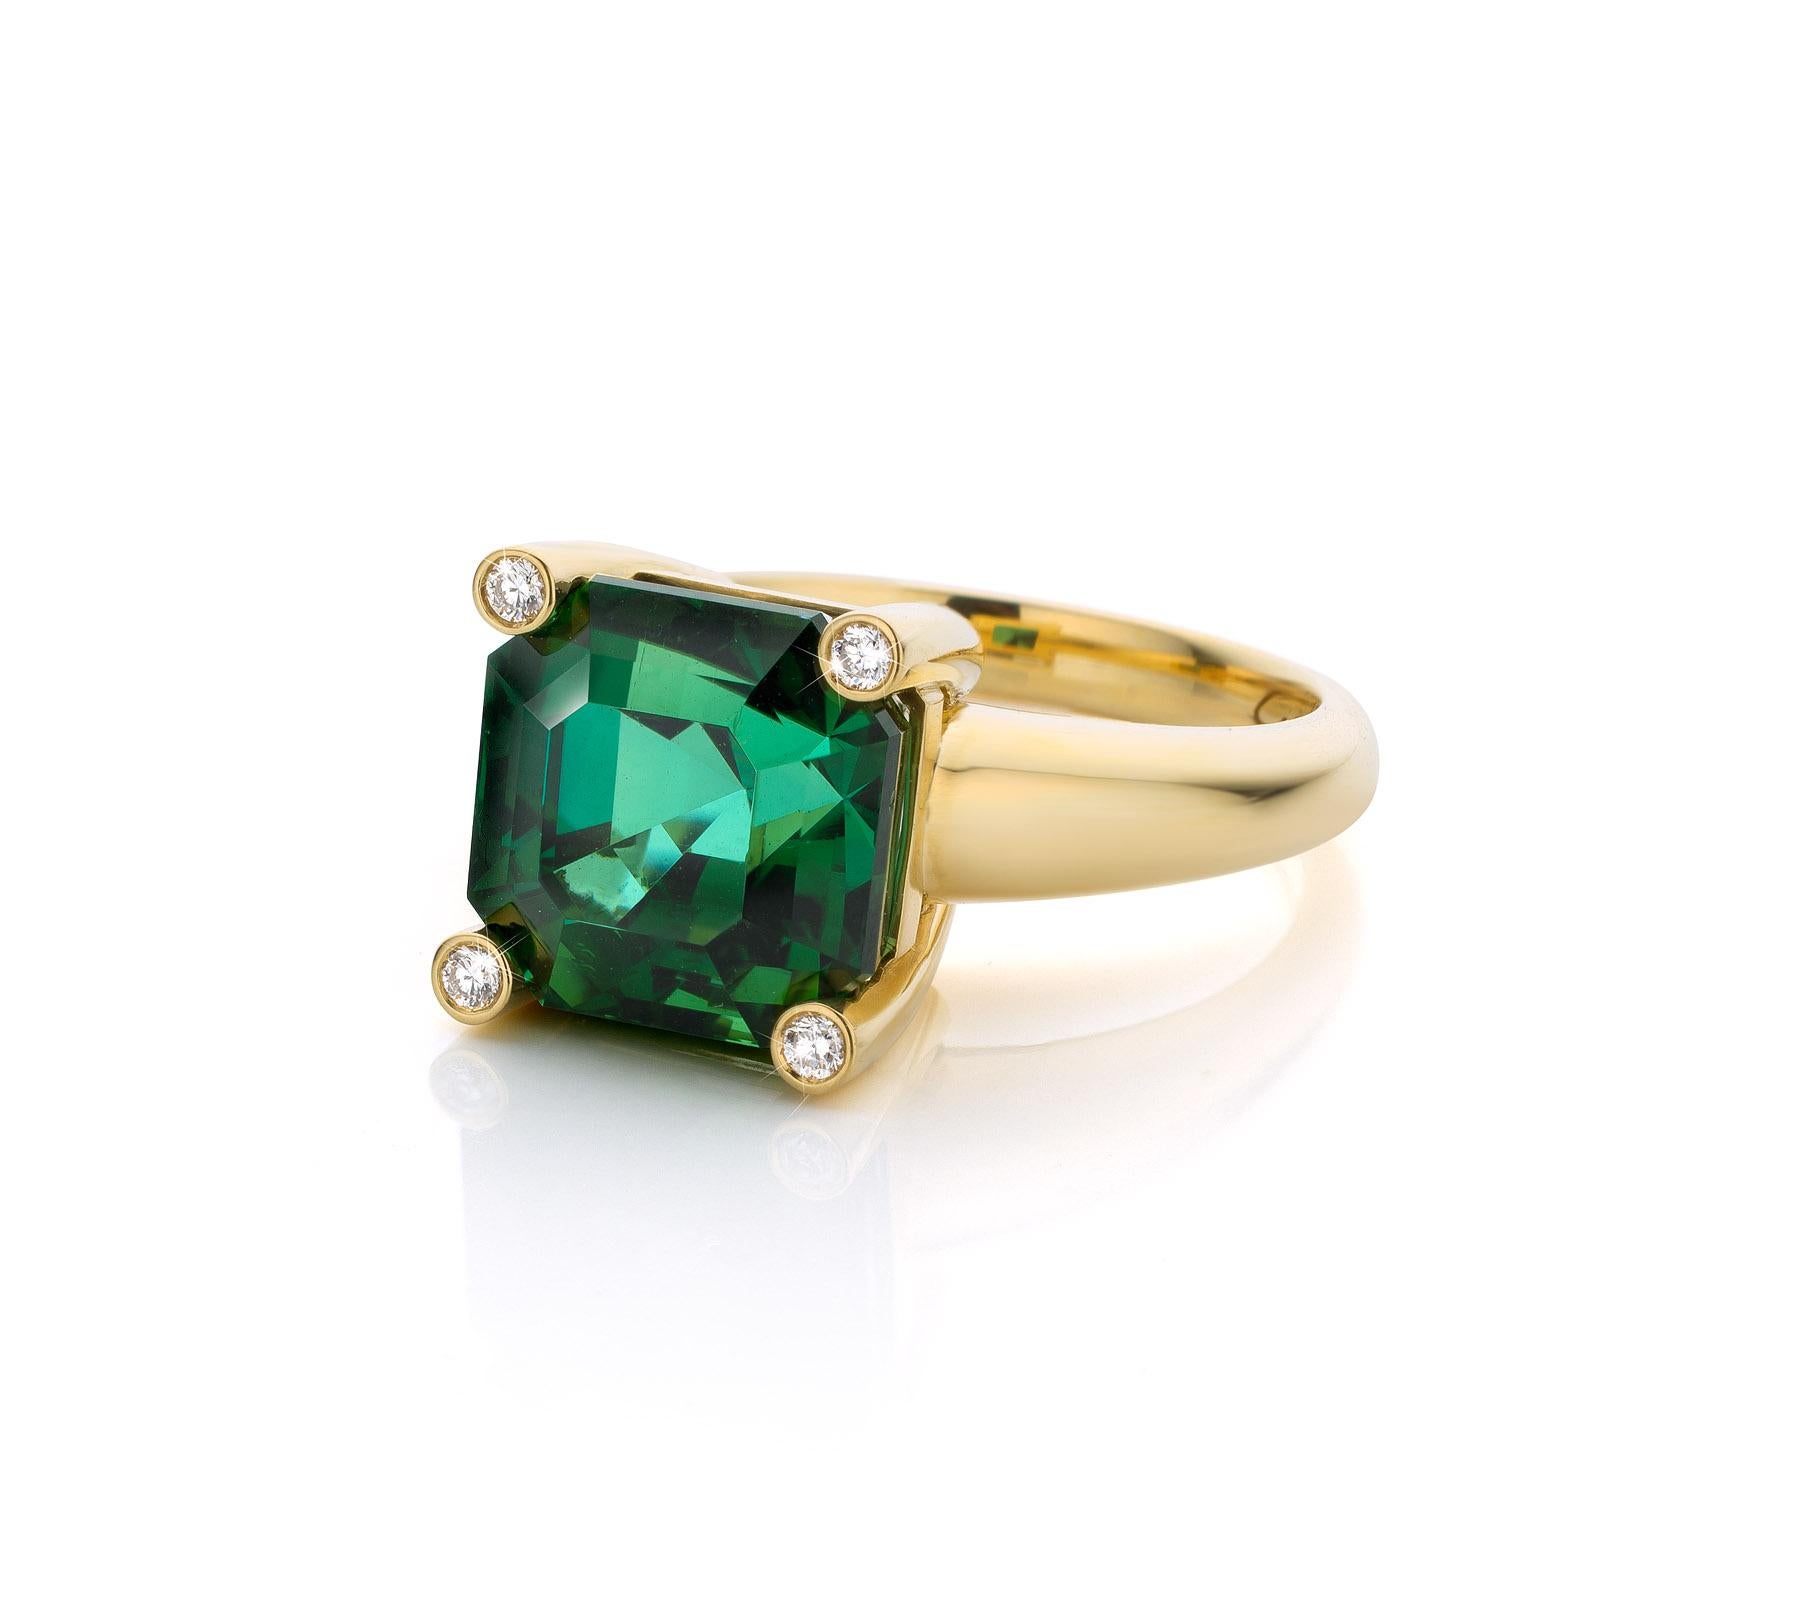 This is a 18 Carat yellow gold ring with a 9,5 ct. vivid green Tourmaline and 4 x 0,005 ct. Brilliant-cut Diamonds. A very special and unique ring for her.
Cober designs exclusive wedding rings, jewels and watches, all of them made by